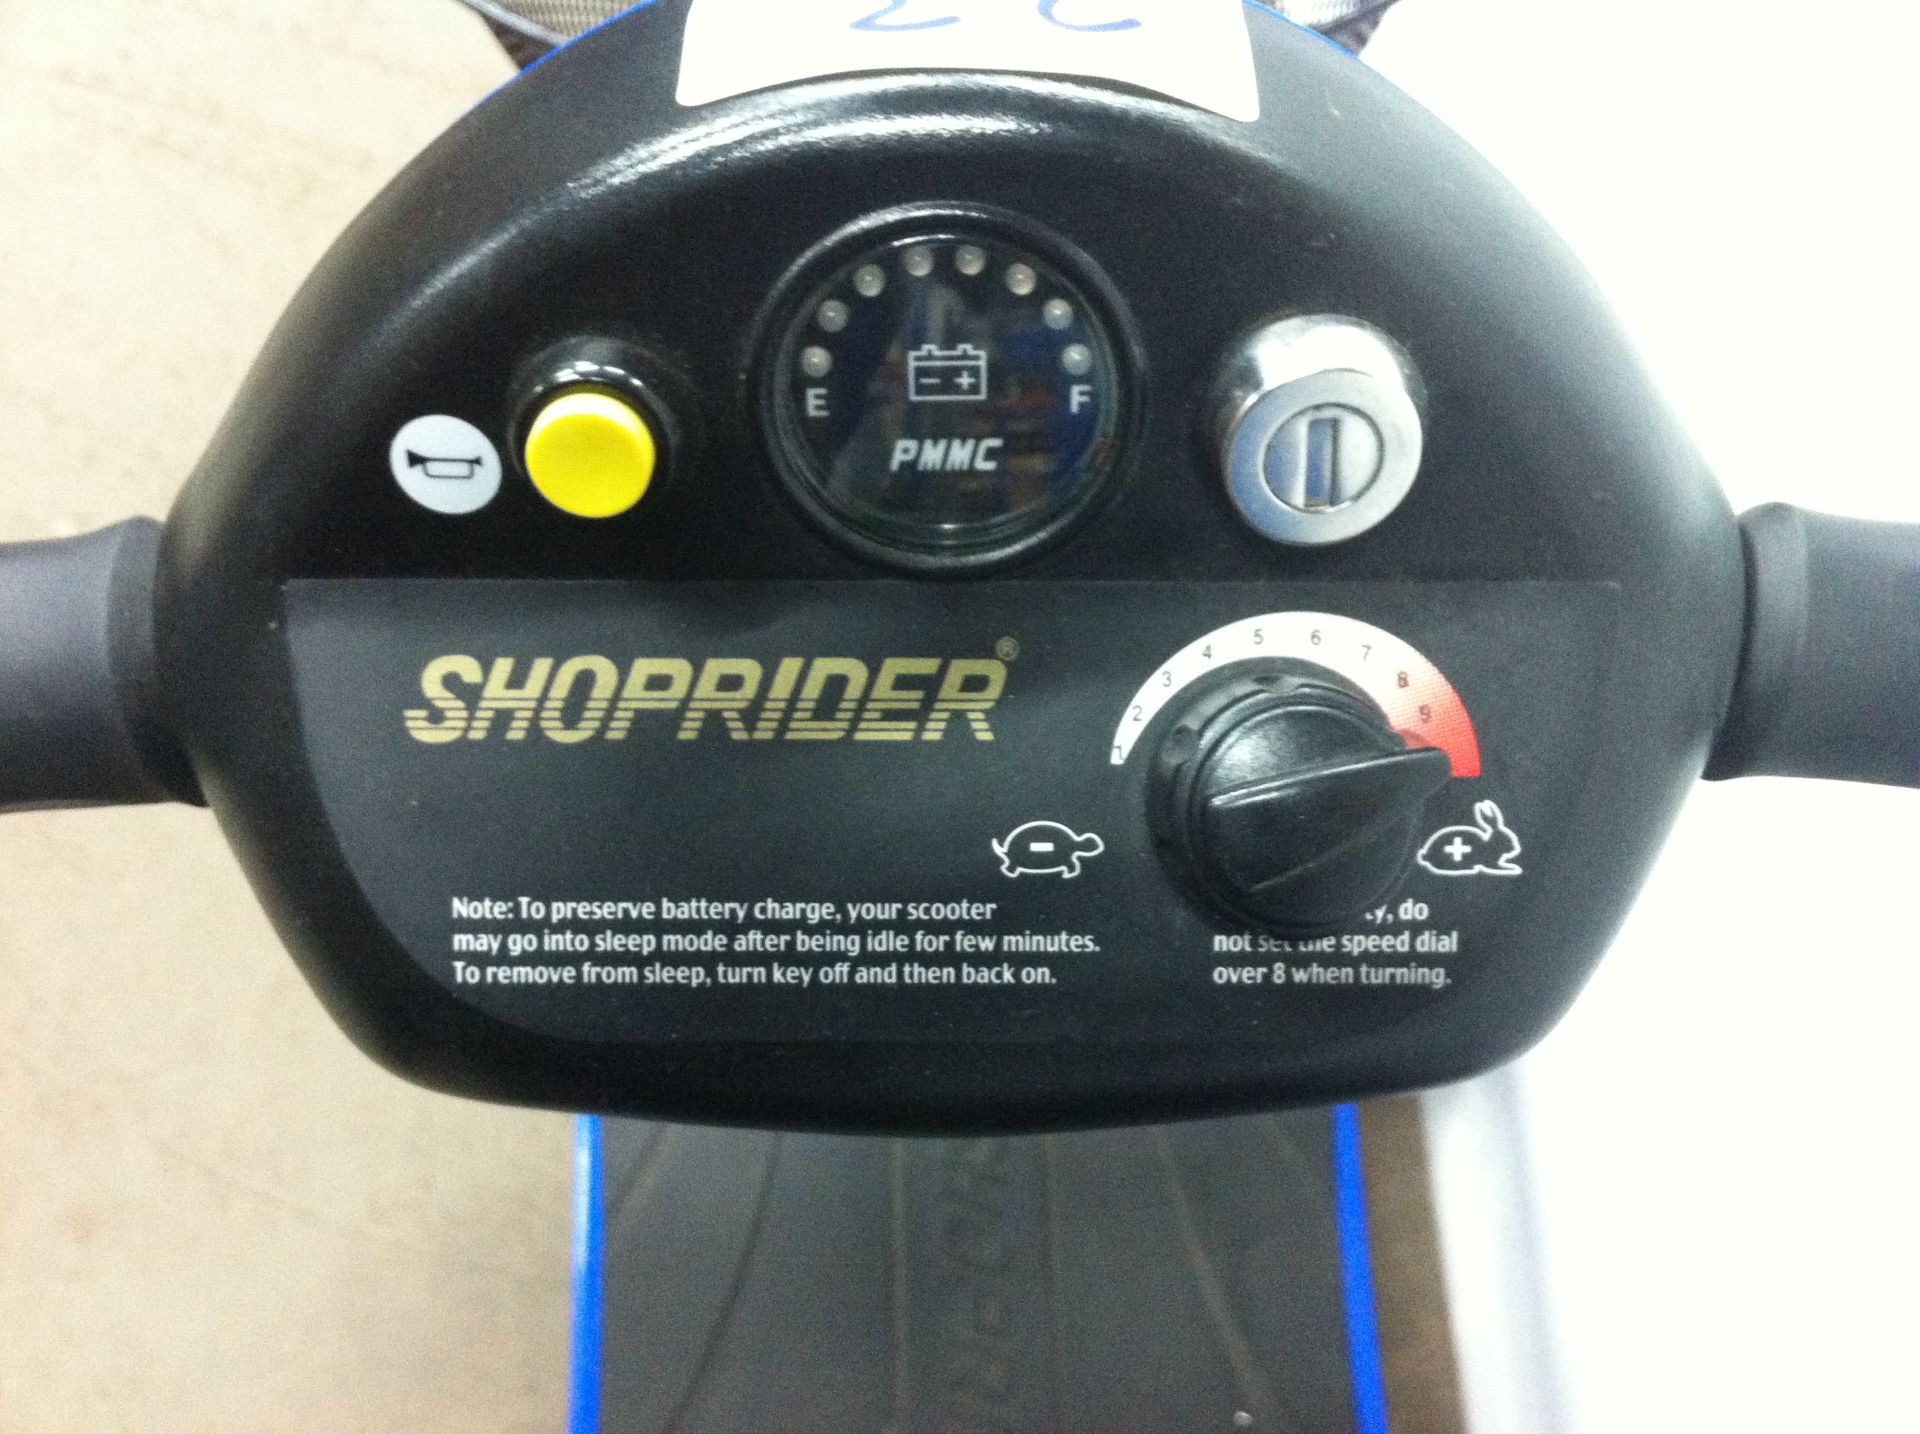 Shoprider mobility scooter - Image 4 of 4